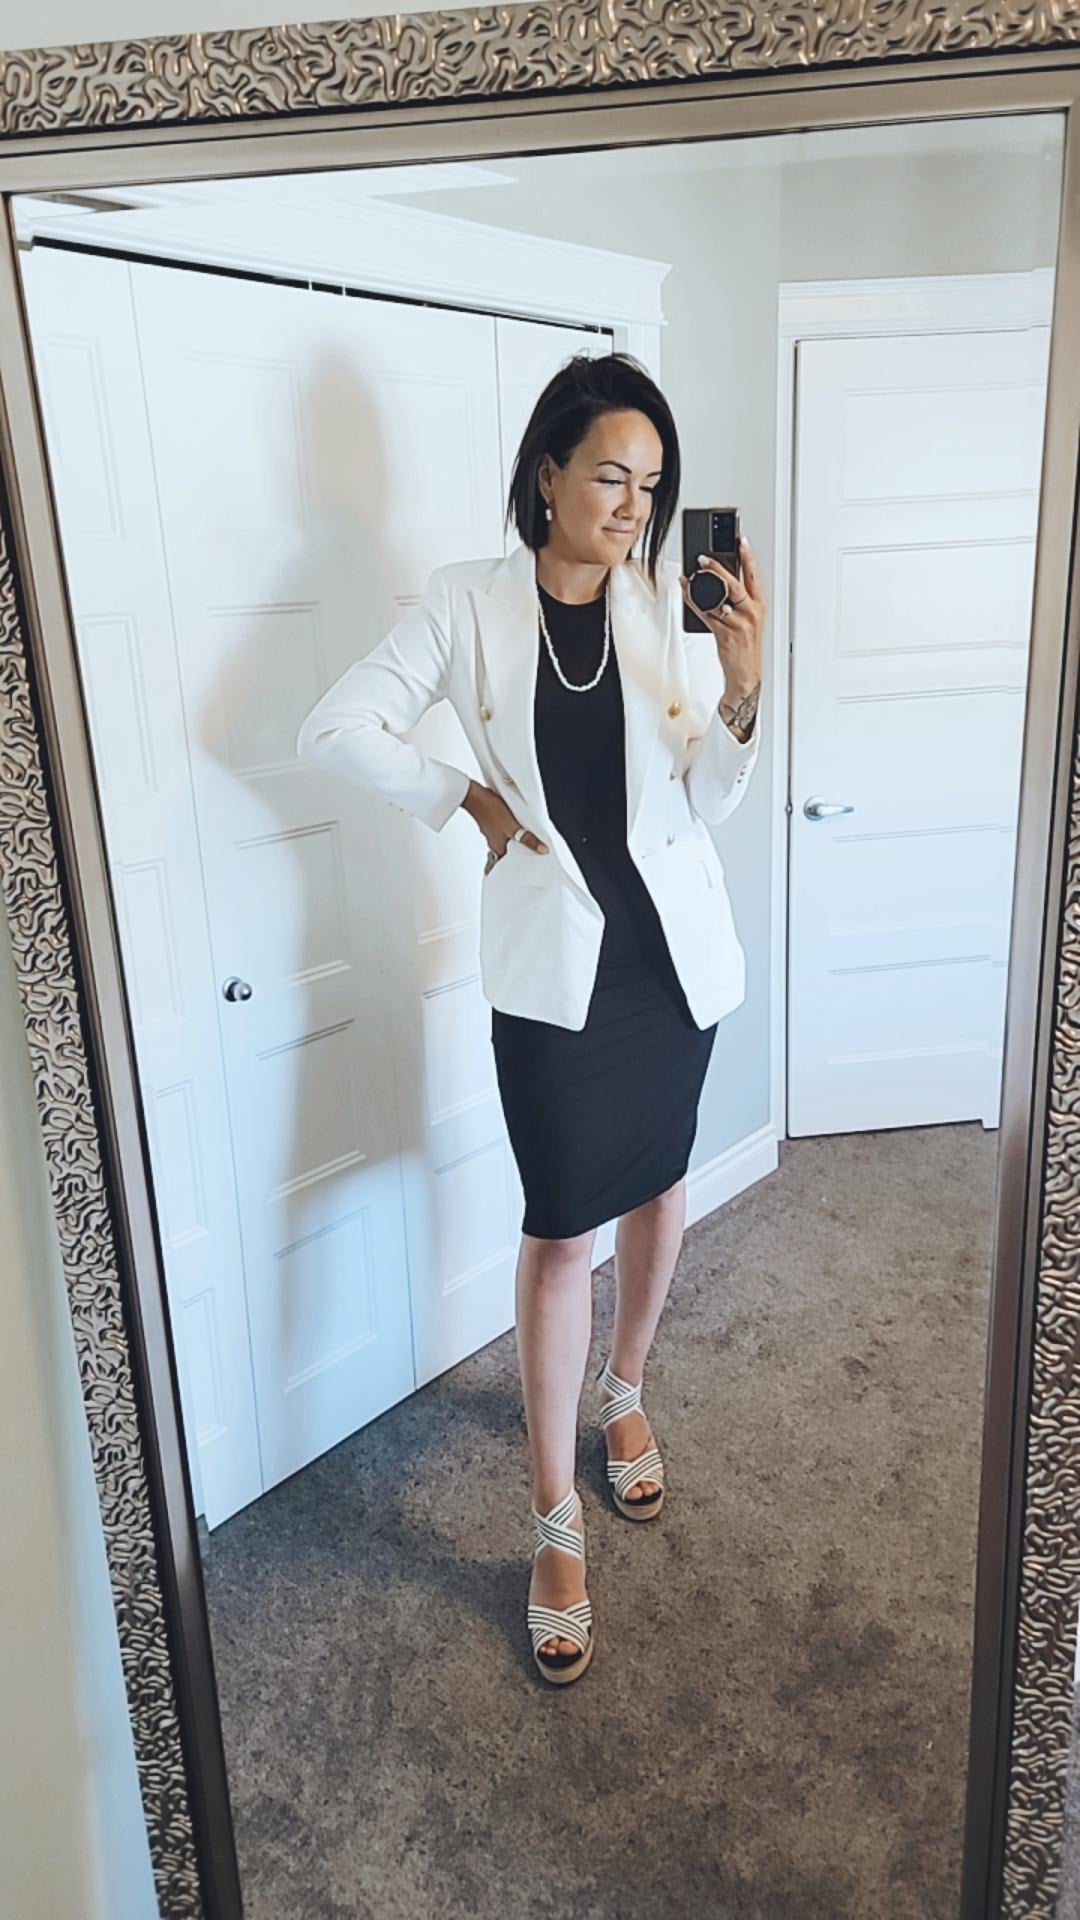 woman wearing black tank dress with a white blazer standing in mirror